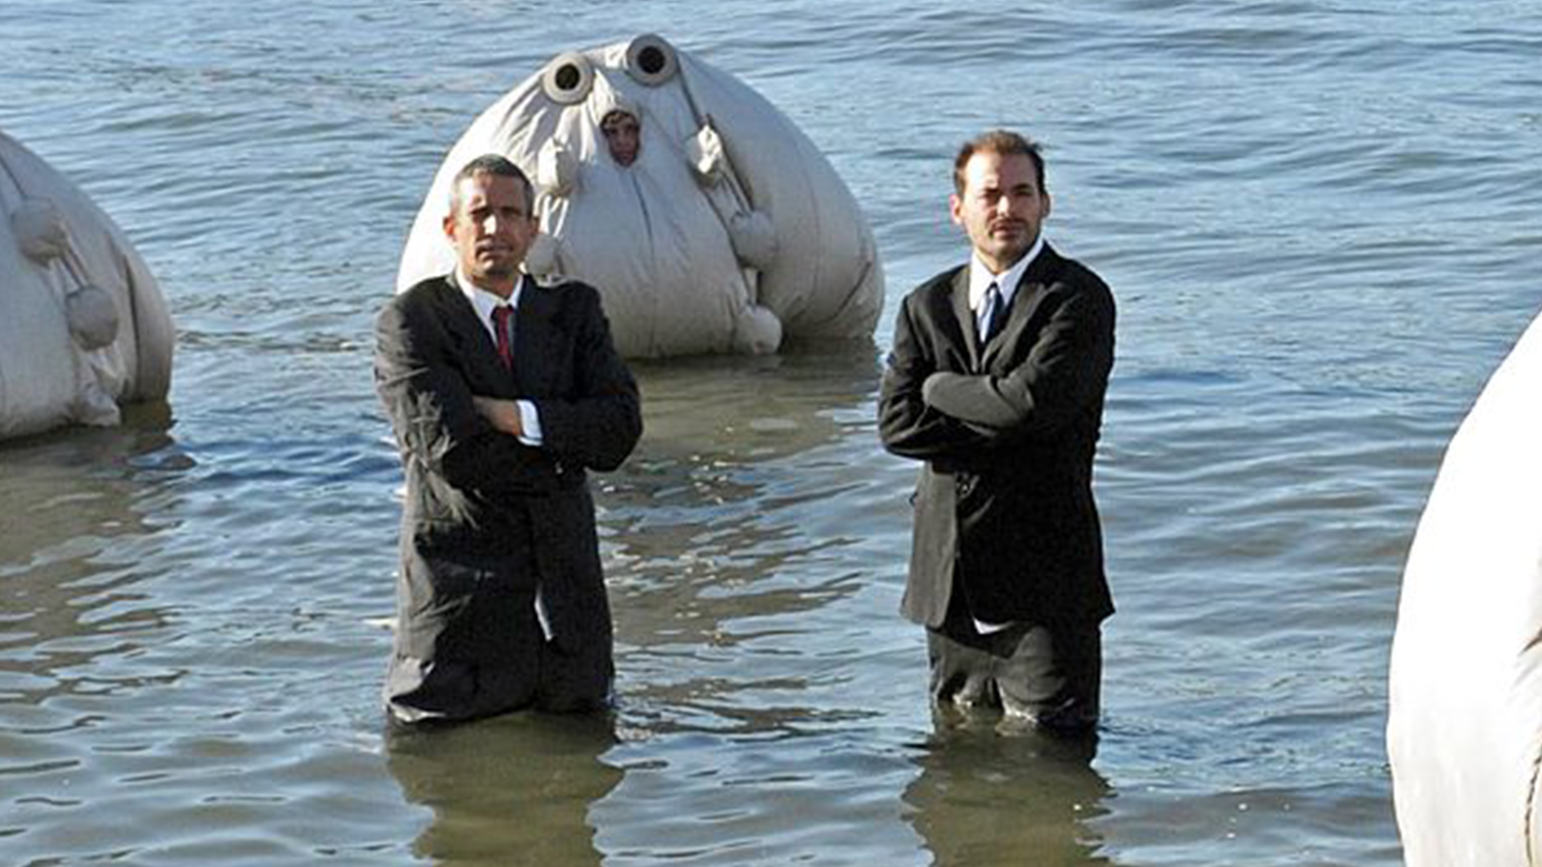 Photo of two men in suits sanding in knee-deep water with three figures in large inflated white fabric surrounding them.